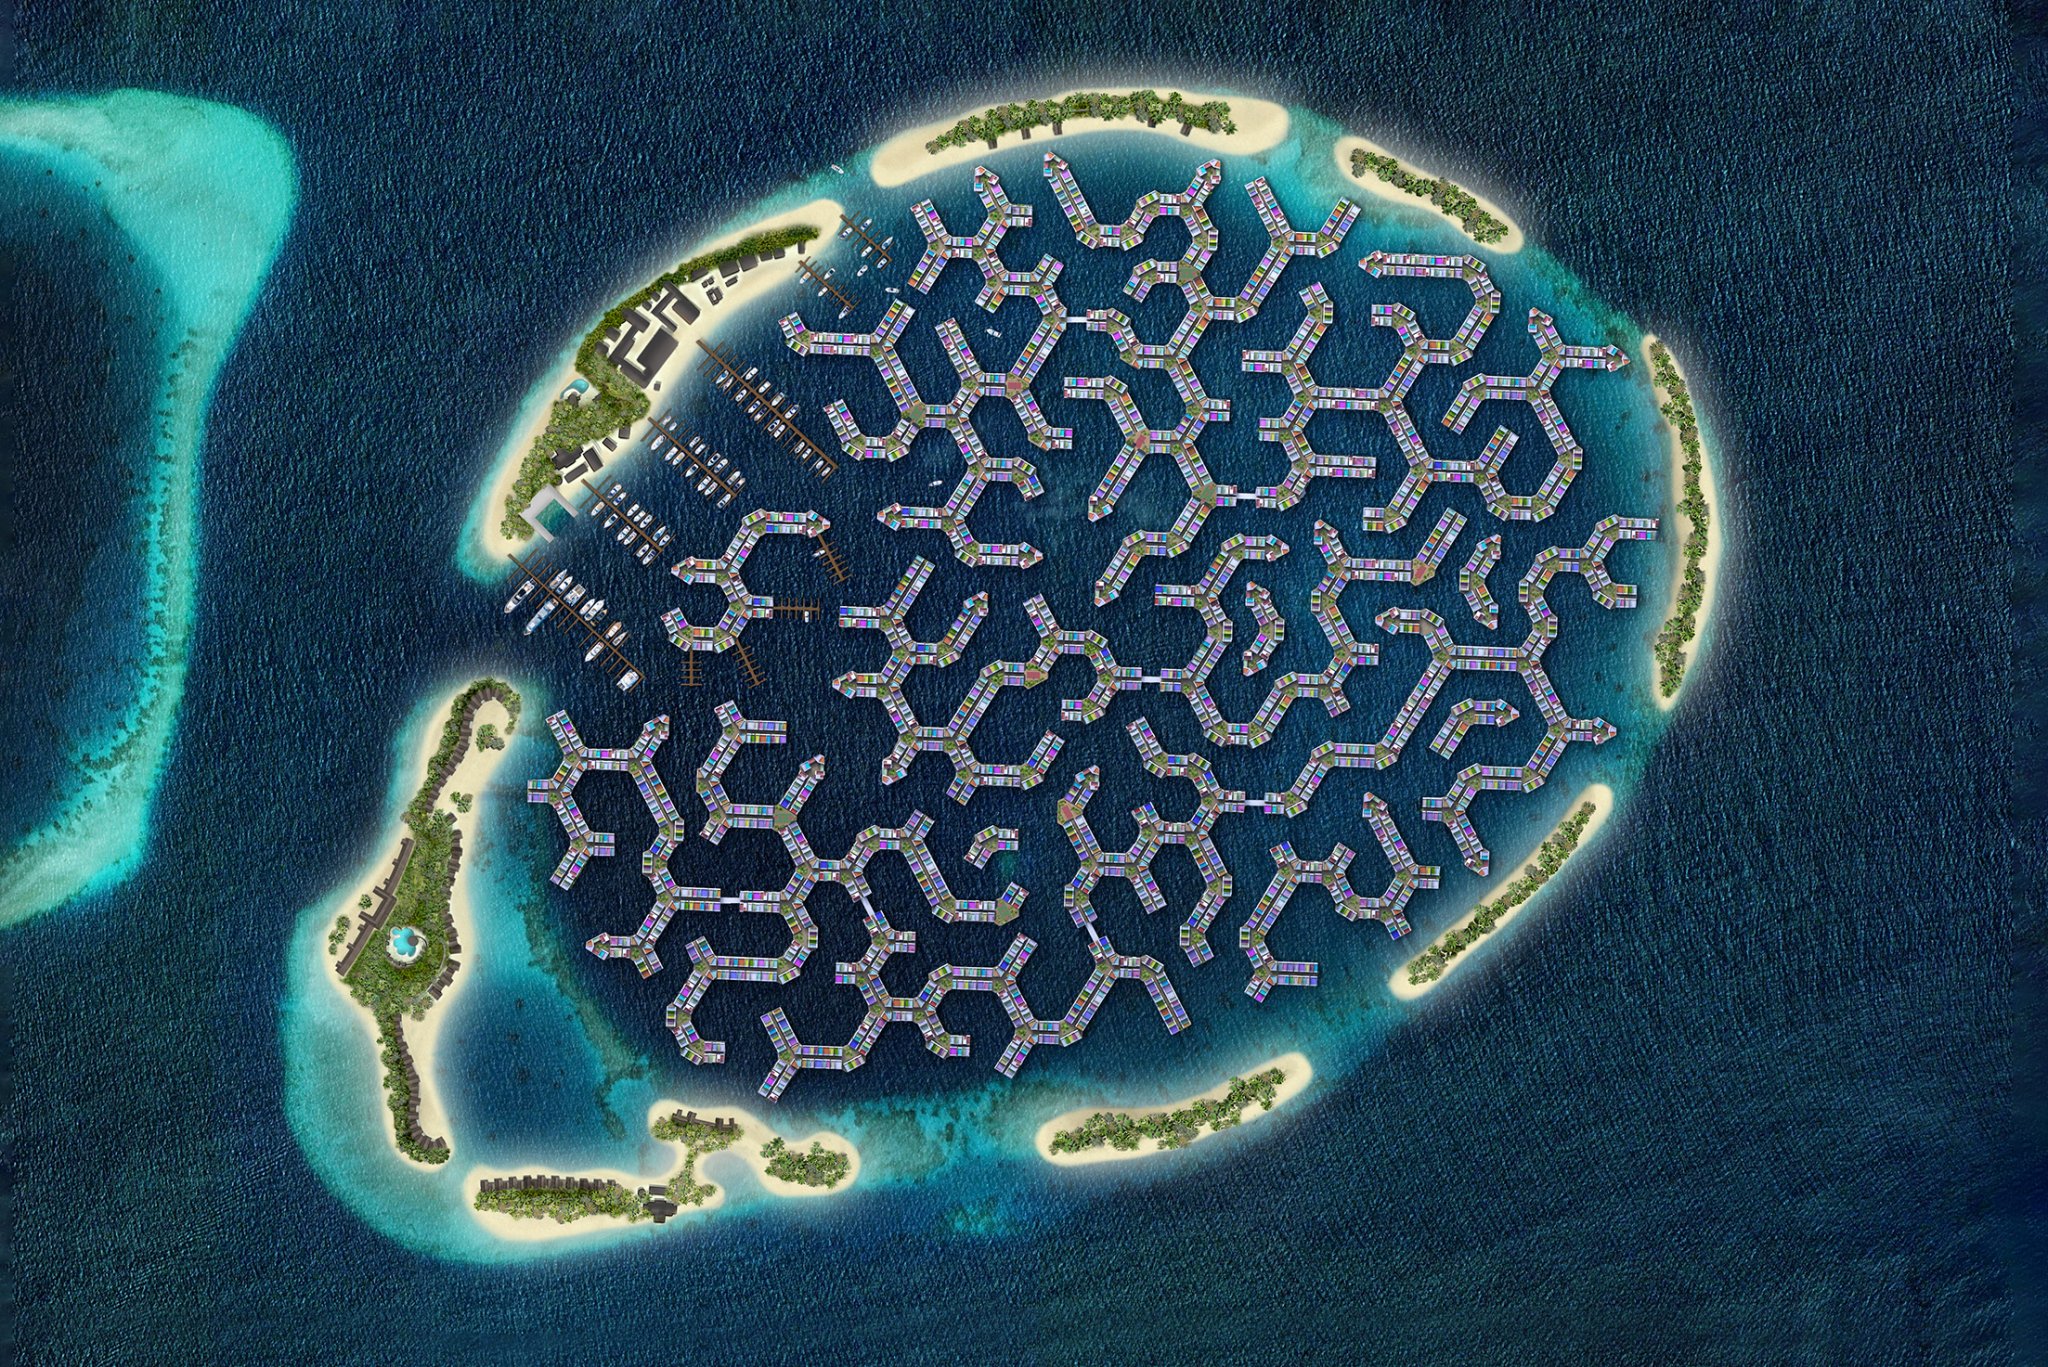 And finally... Island city plan floated for the Maldives